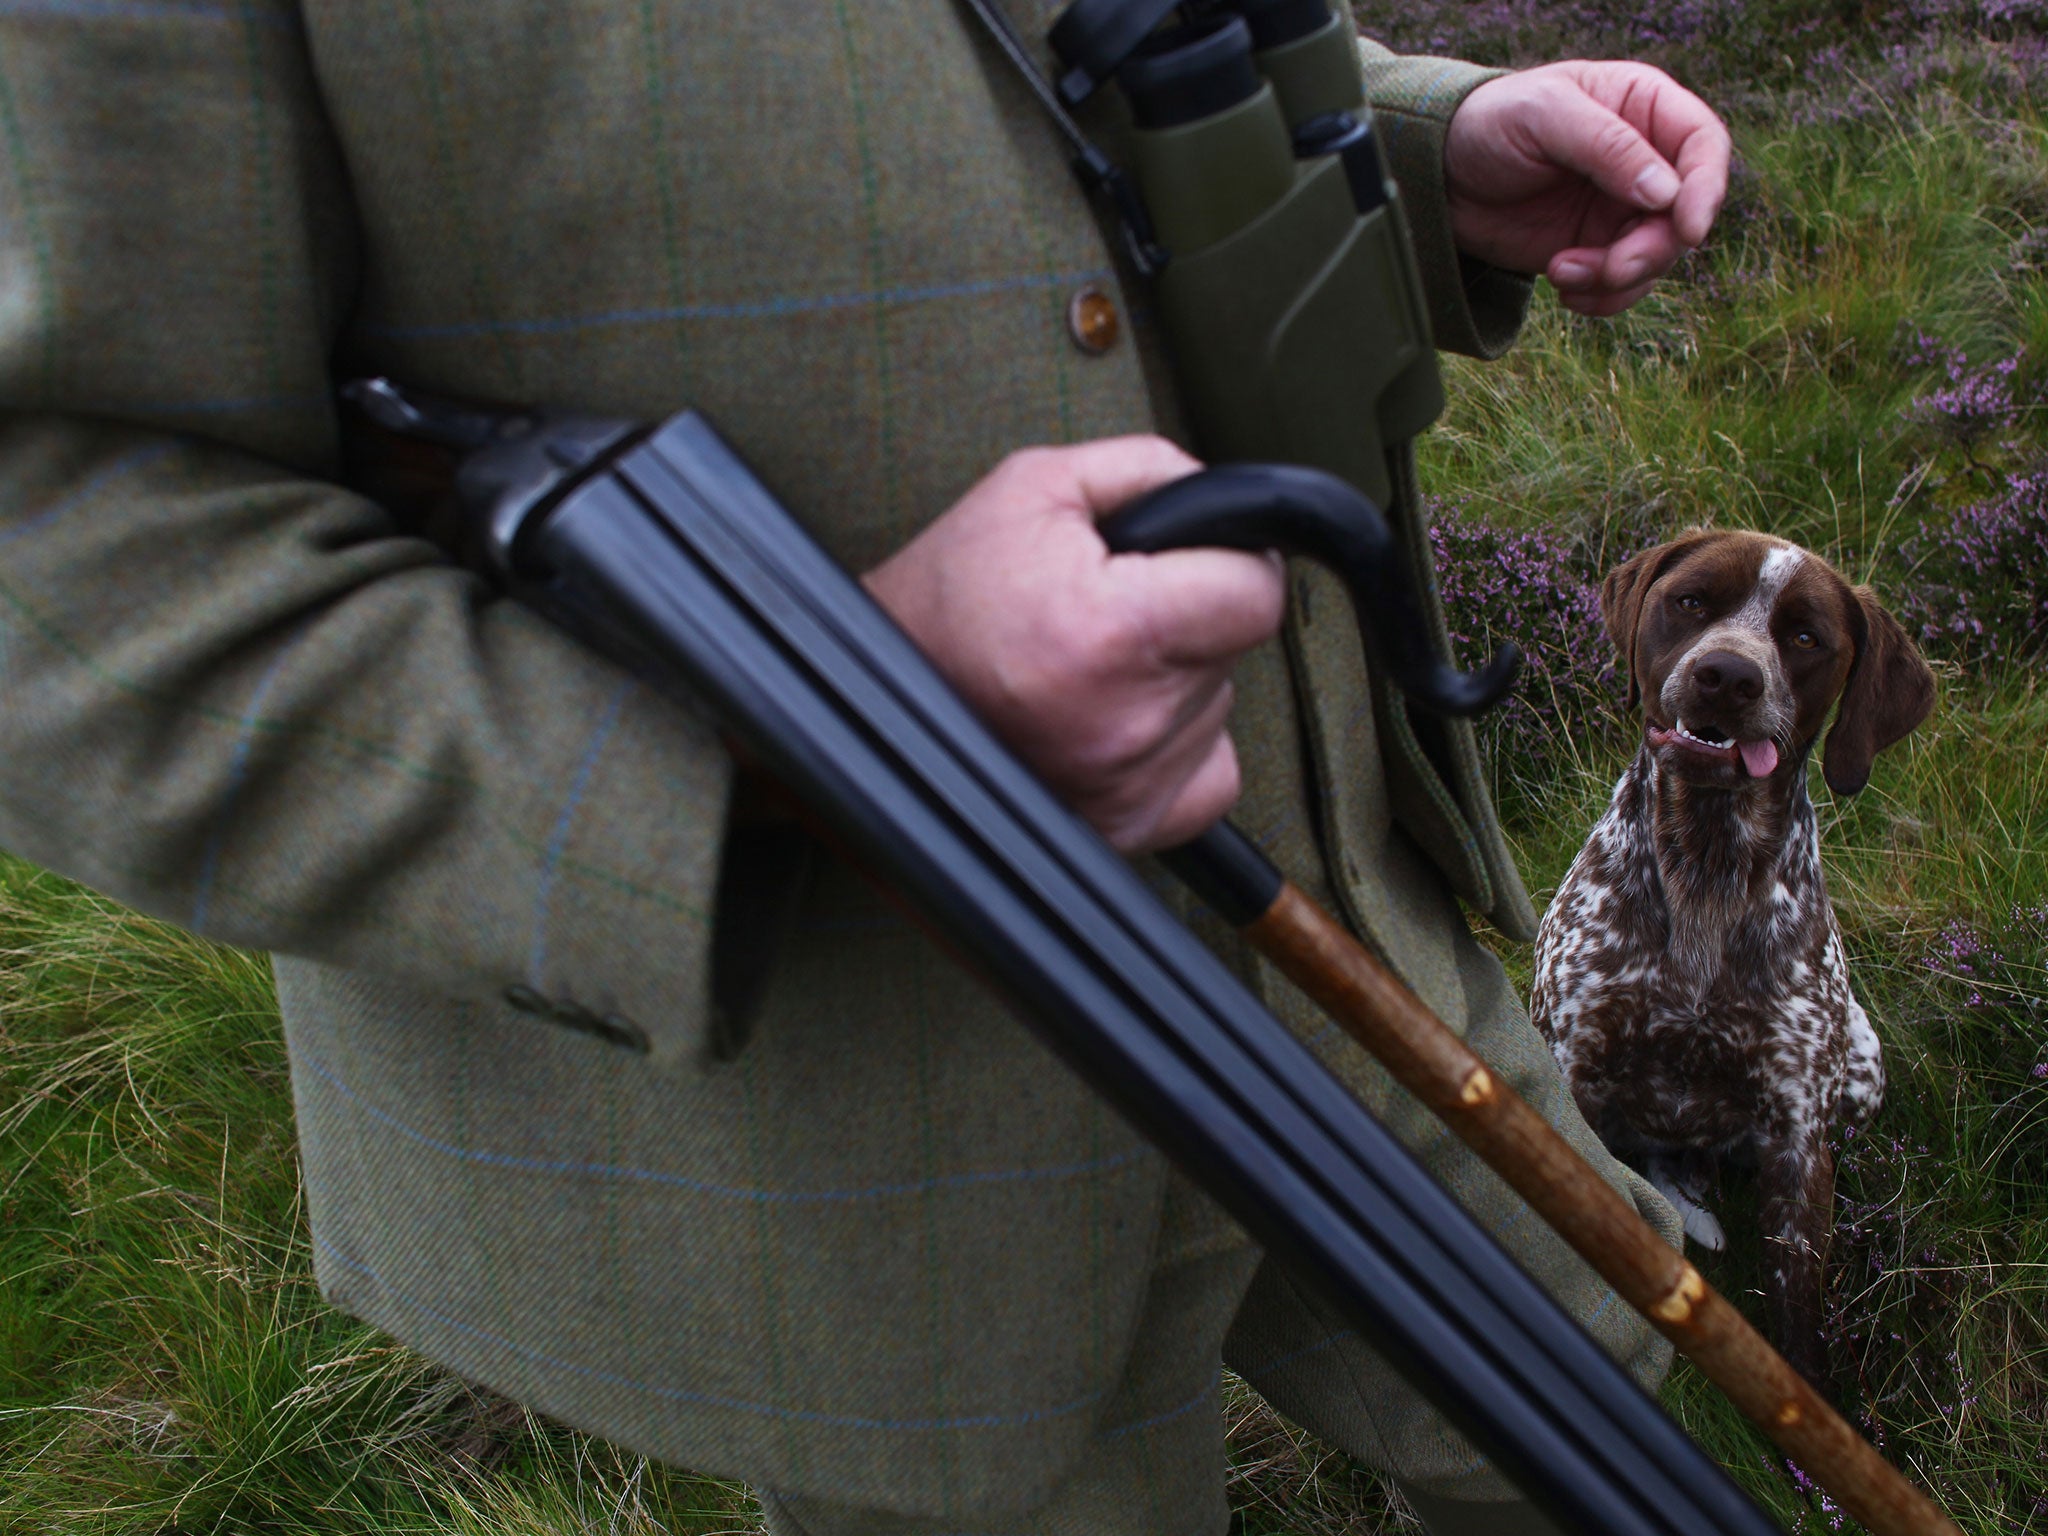 Grouse shooting is thought to be ruining the countryside in Northern England